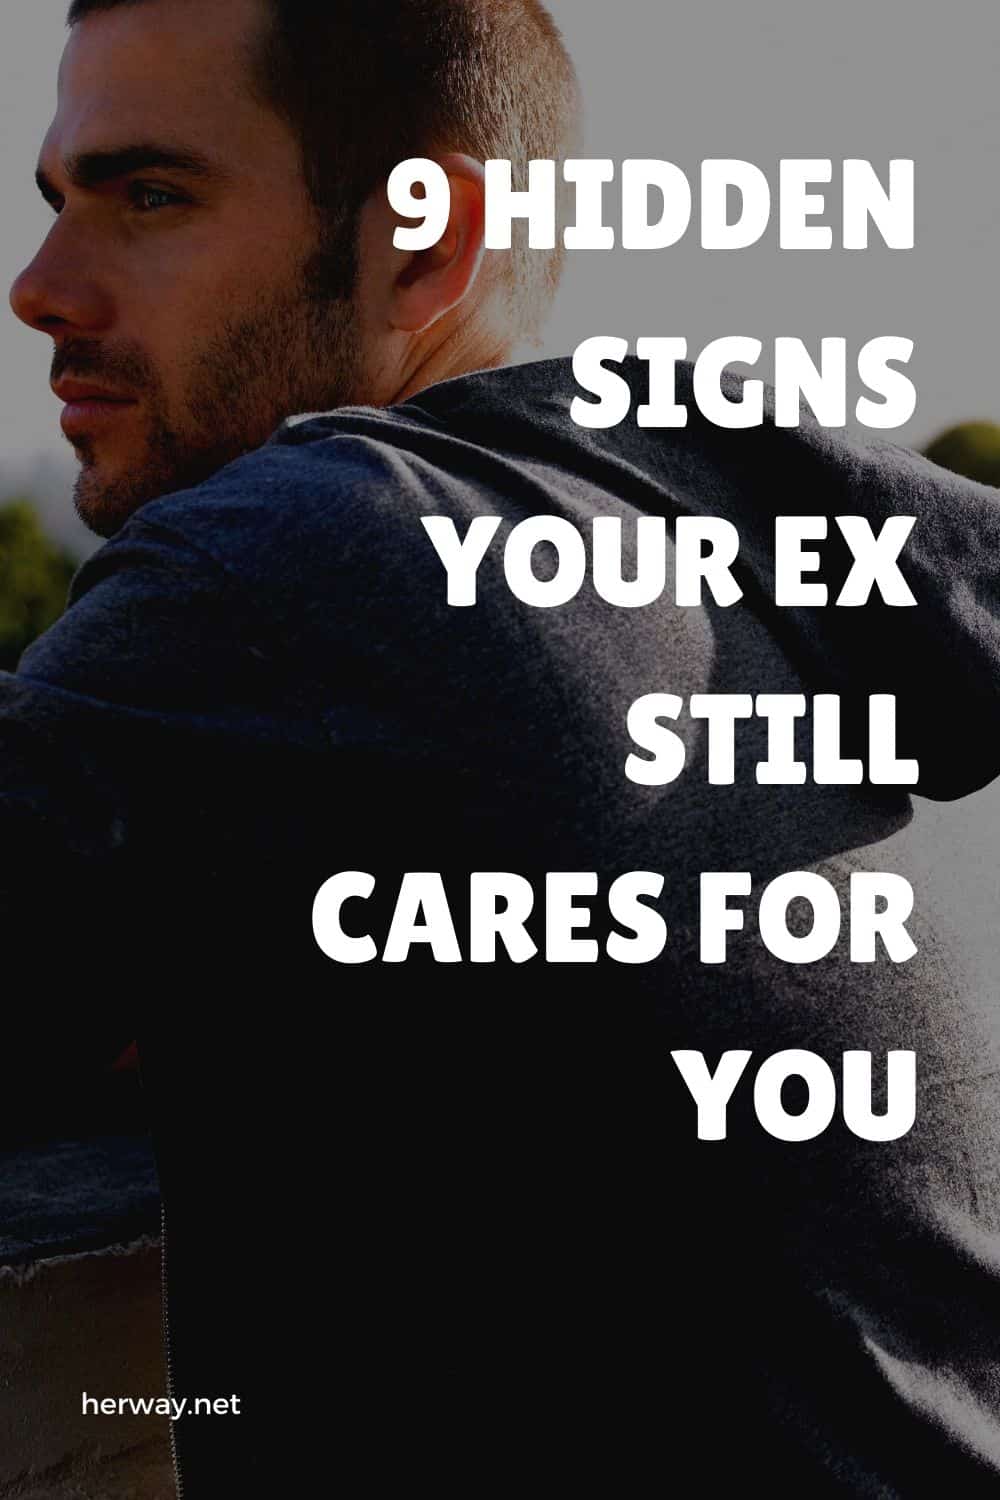 9 Hidden Signs Your Ex Still Cares For You